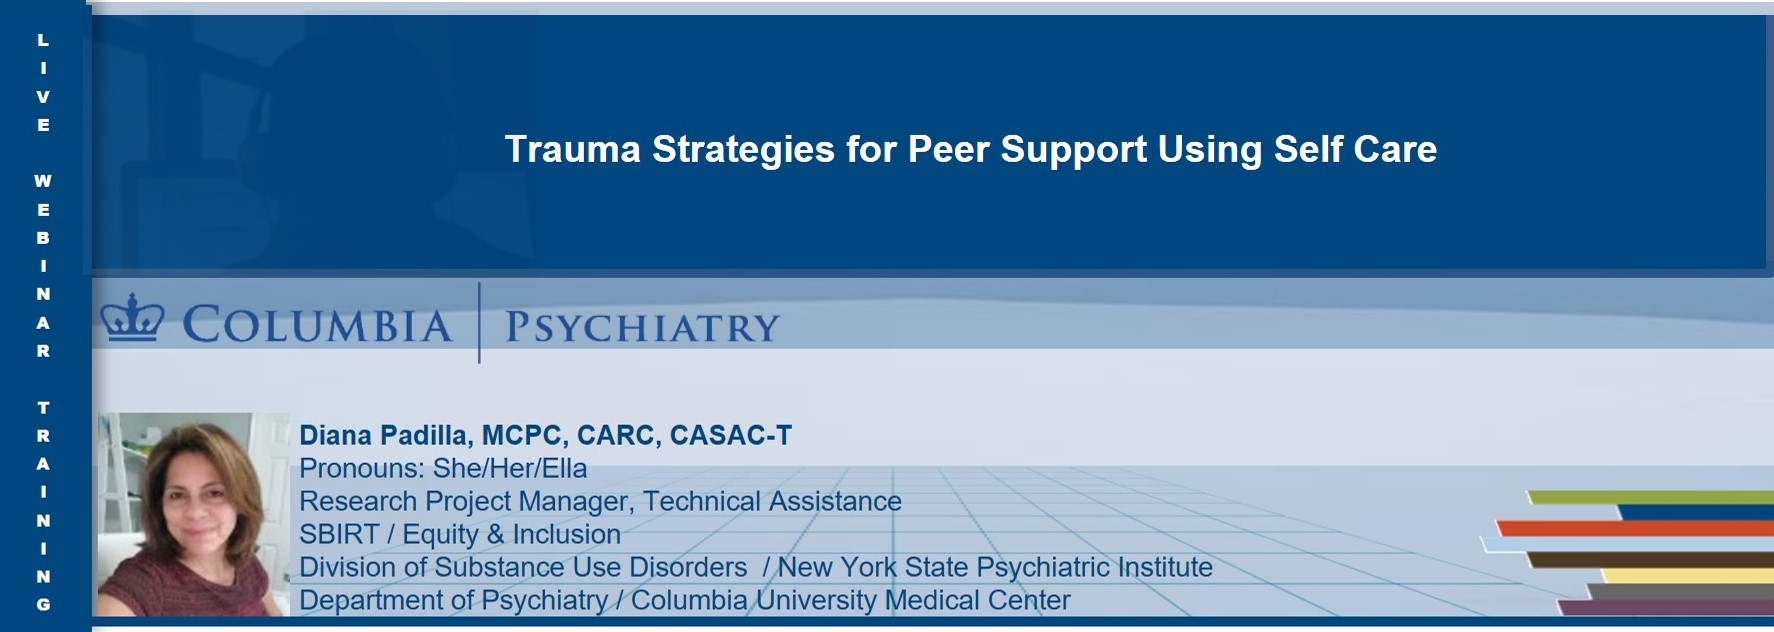 Trauma Strategies for Peer Support with Self Care